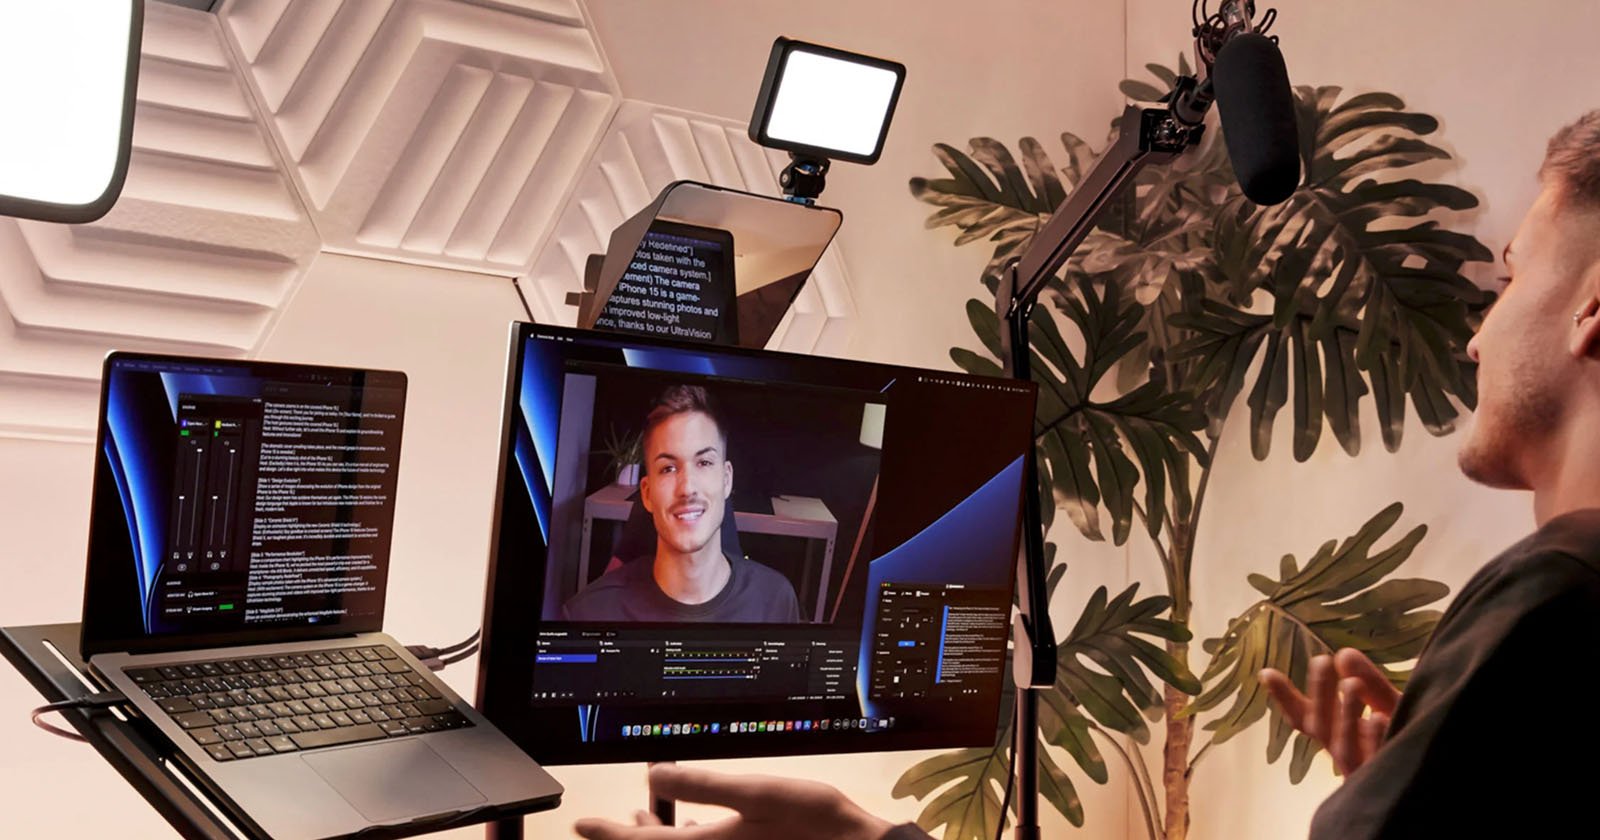 Elgatos New Teleprompter is an All-In-One, Plug-and-Play Device